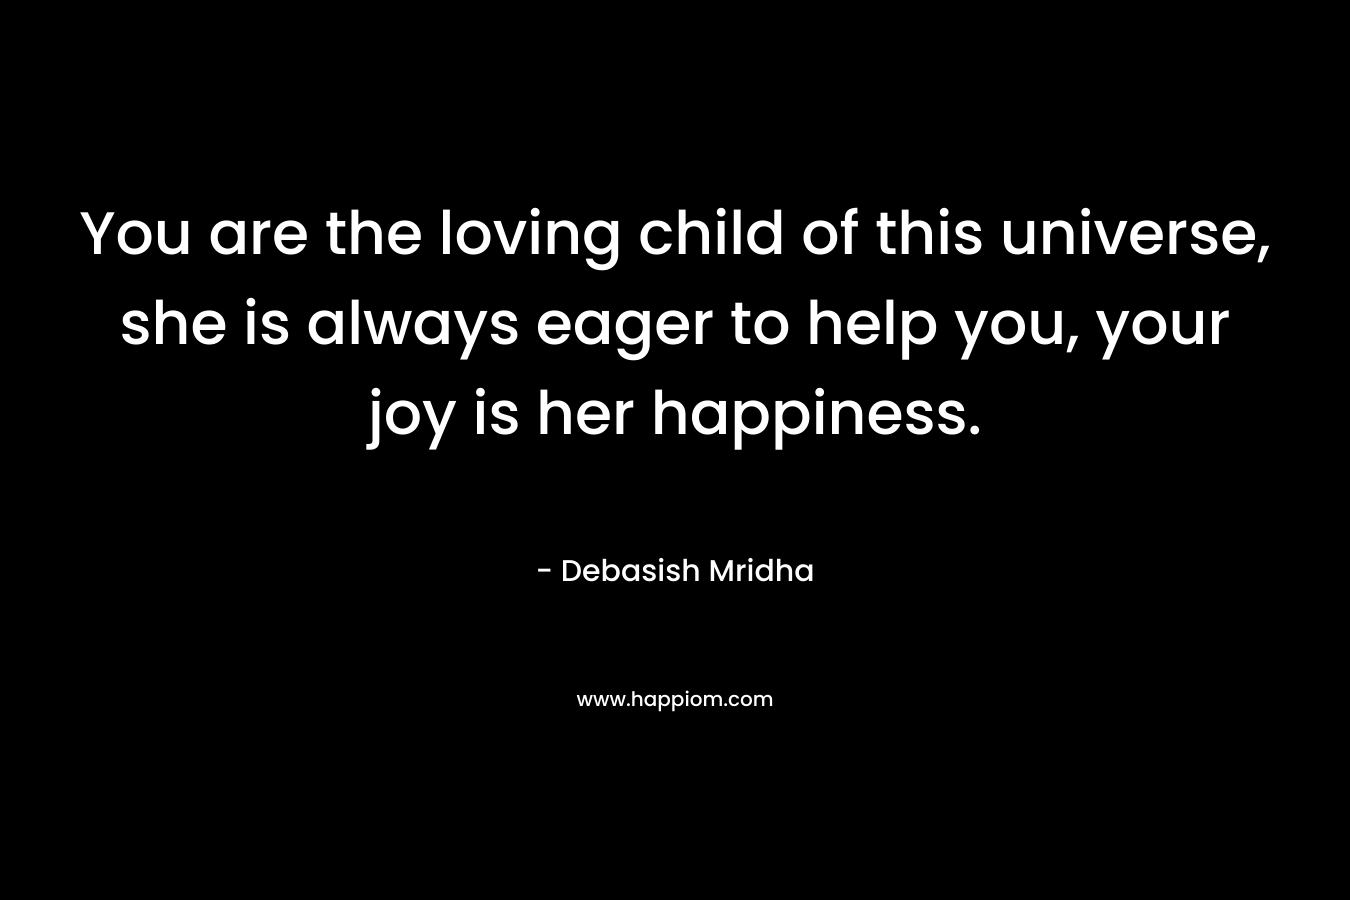 You are the loving child of this universe, she is always eager to help you, your joy is her happiness.